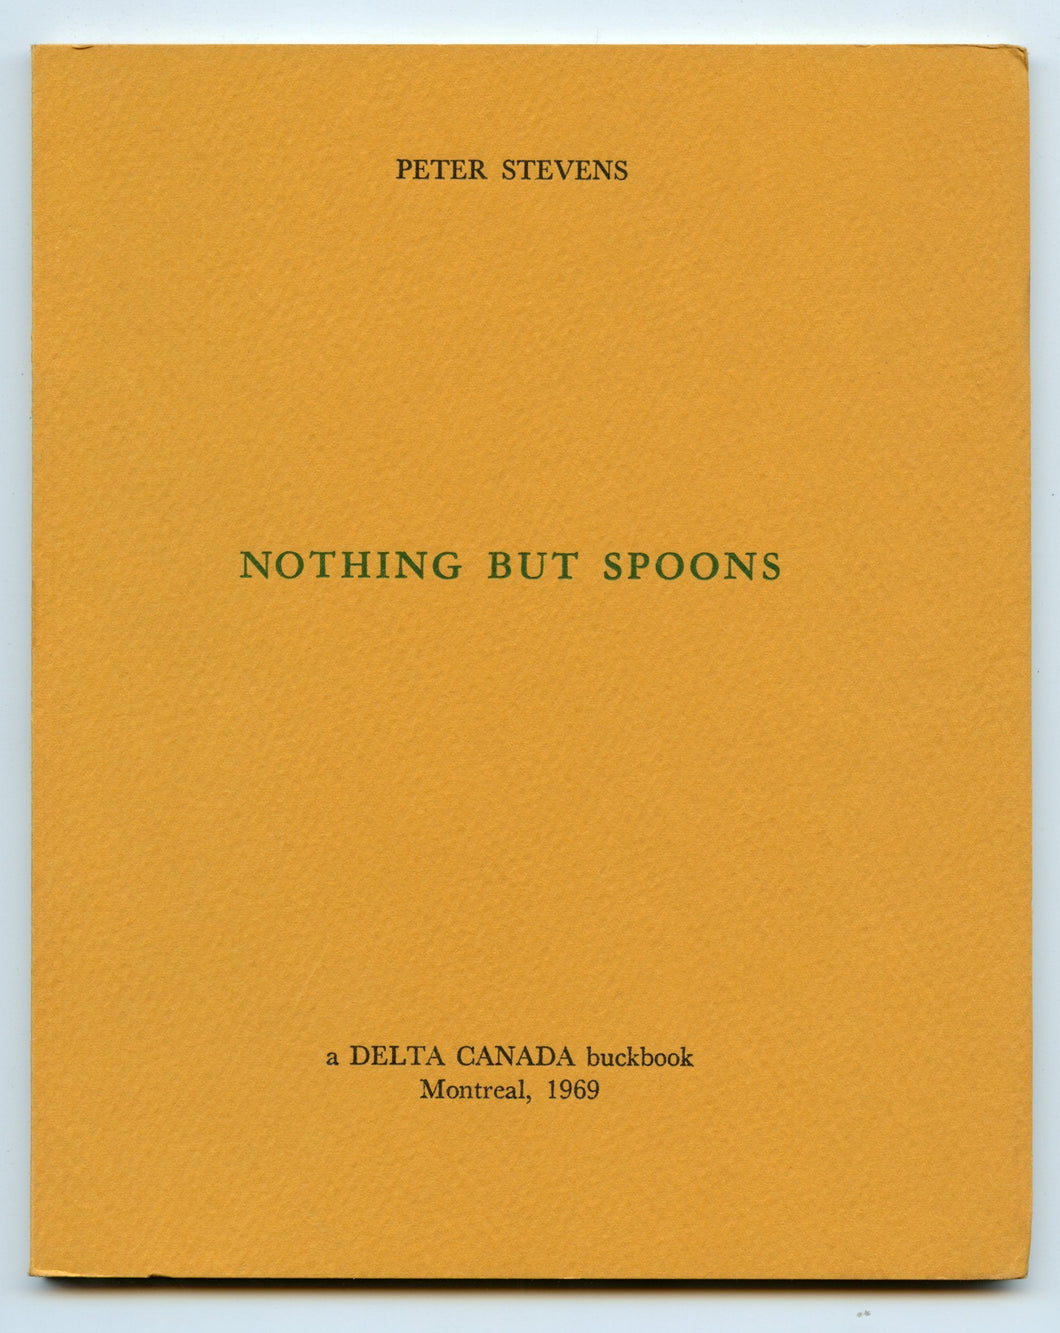 Nothing But Spoons